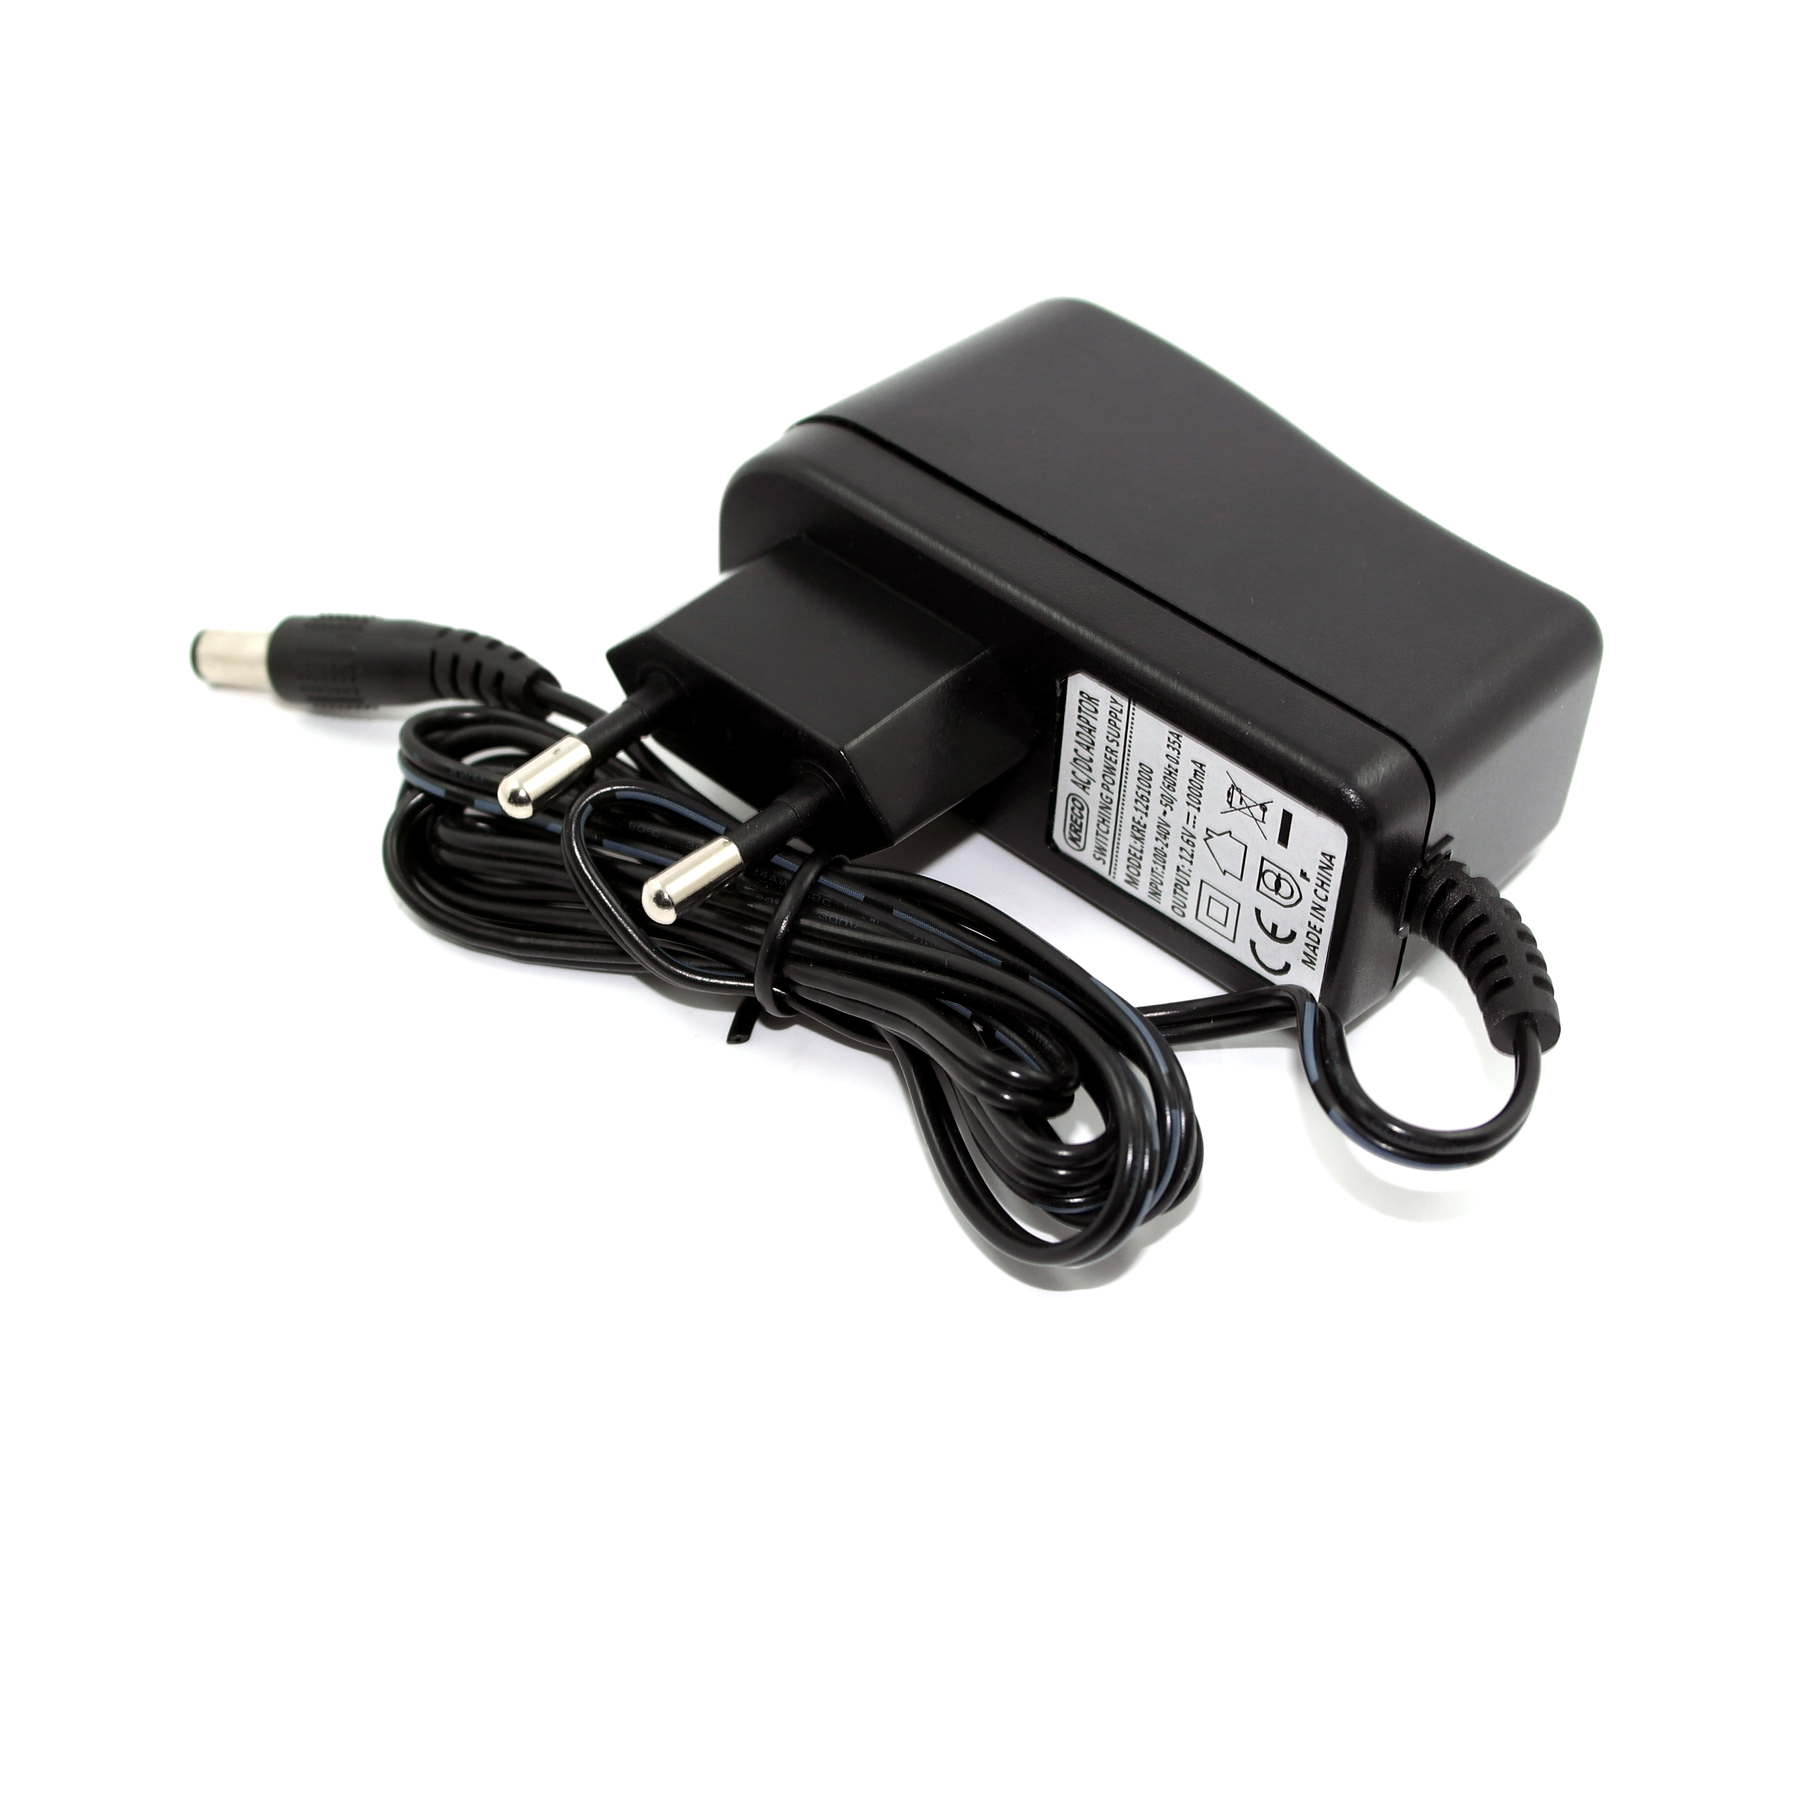 12.6V travel charger, power supply, charger